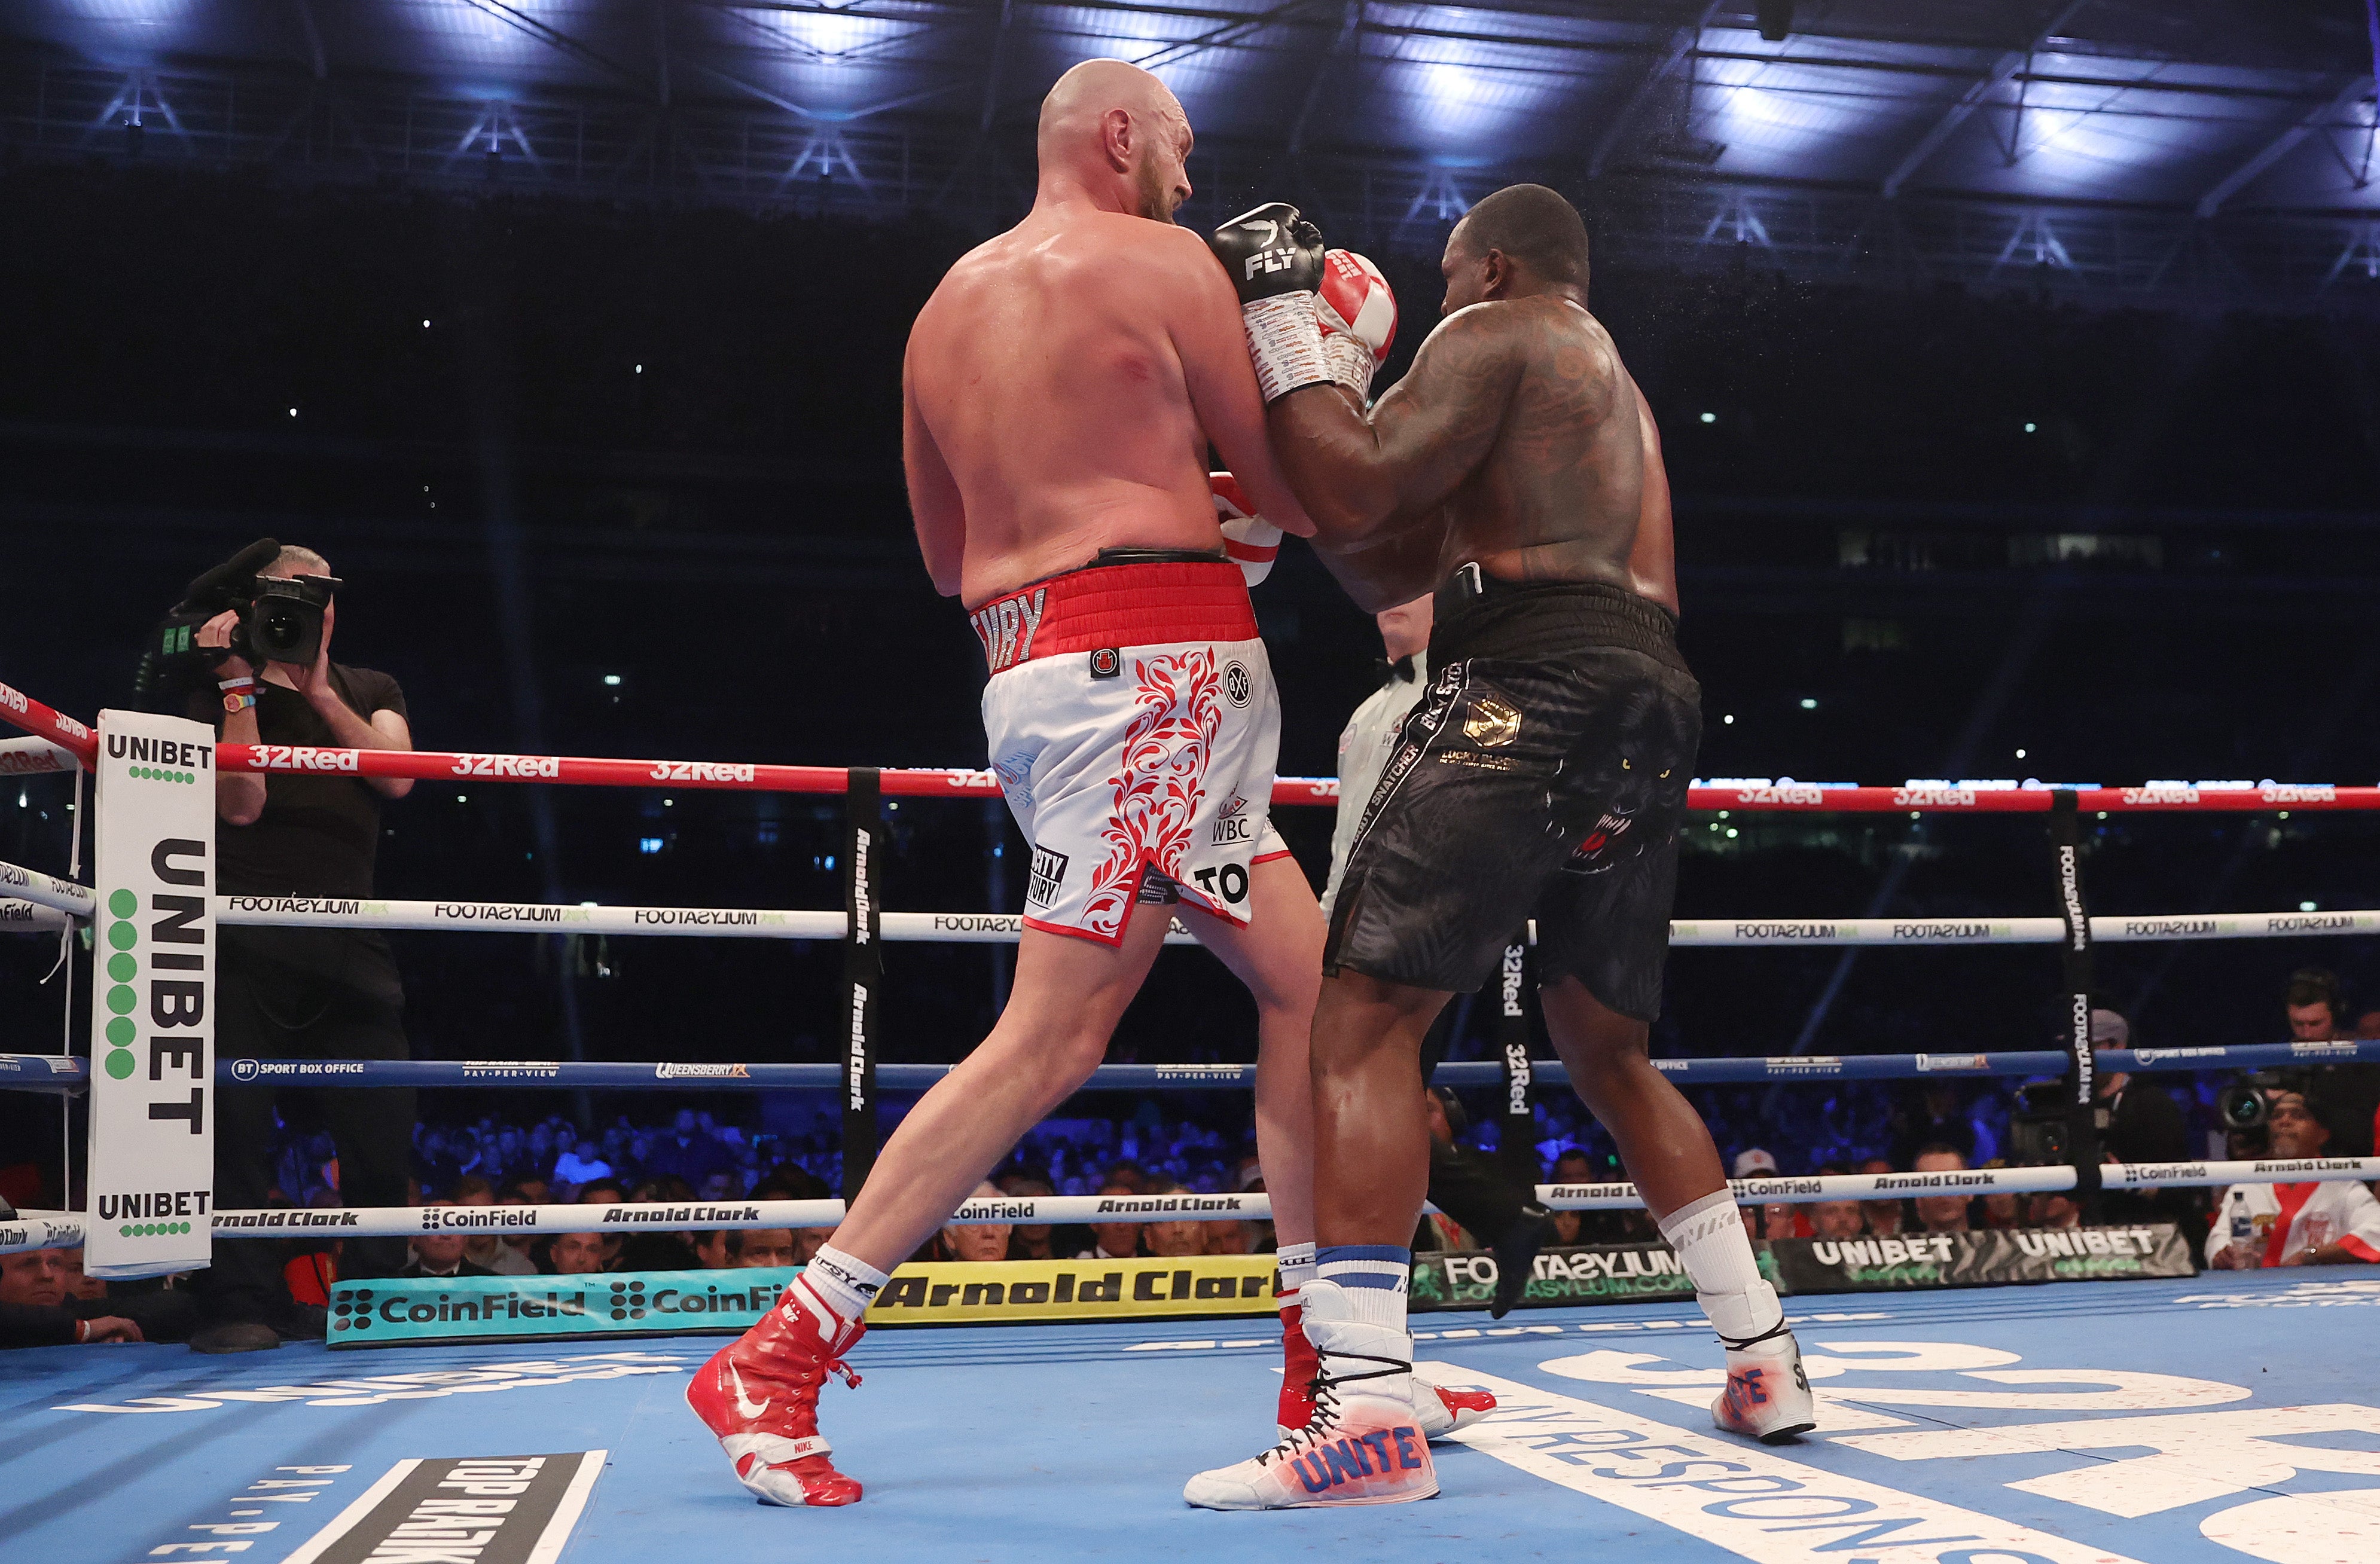 Fury vs Whyte LIVE Result as Fury knocks out Whyte at Wembley The Independent